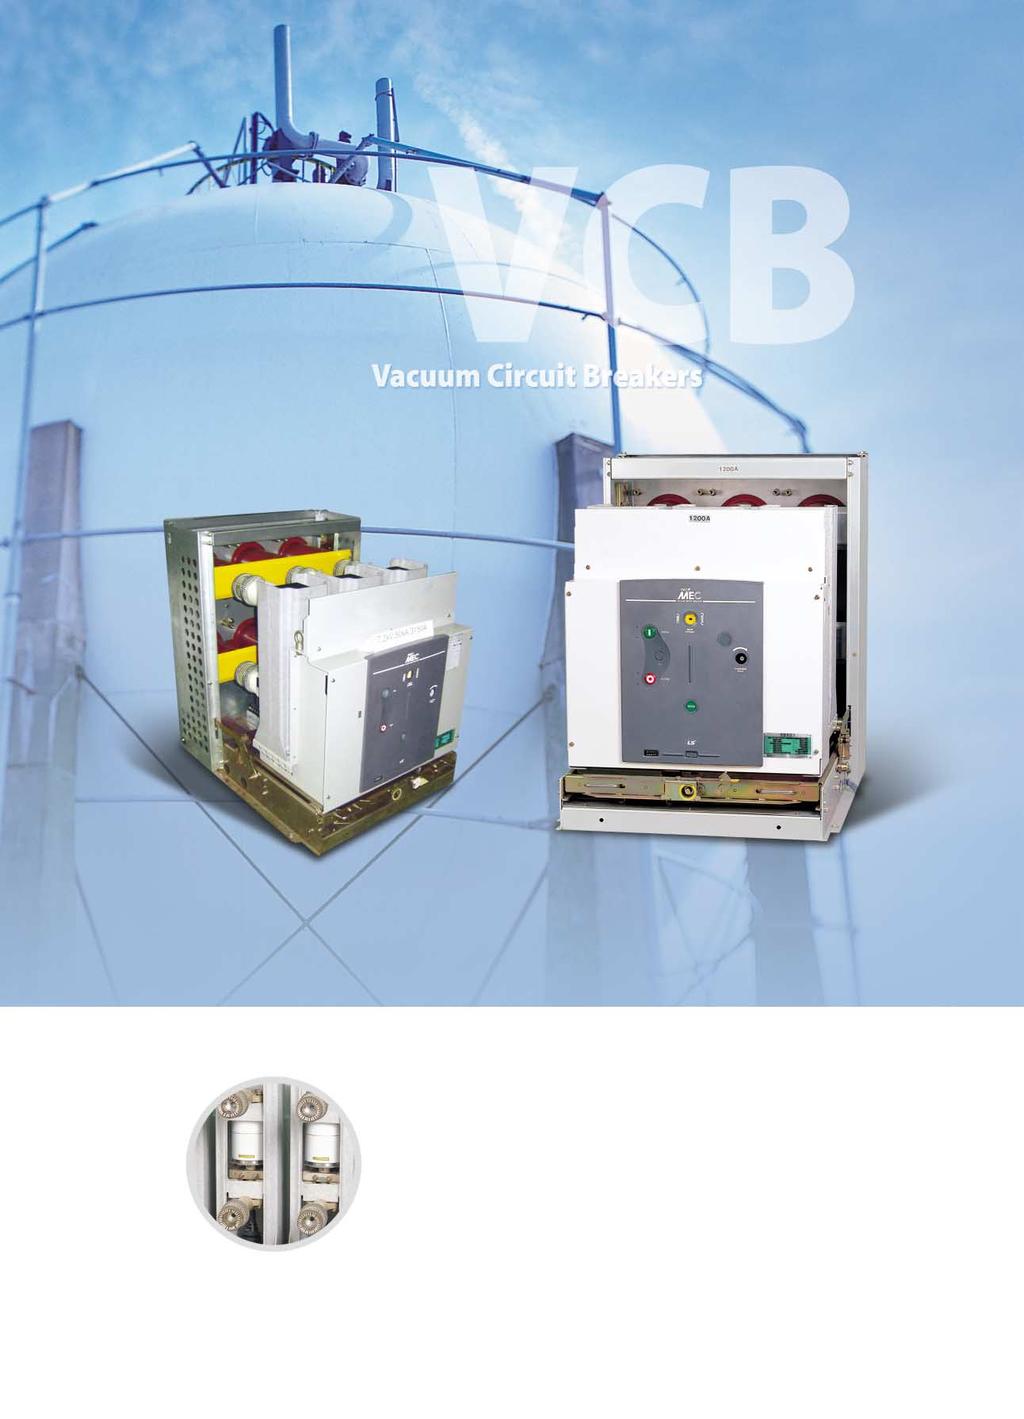 Vacuum Circuit Breakers for Power Plants It is recognized for reliability by